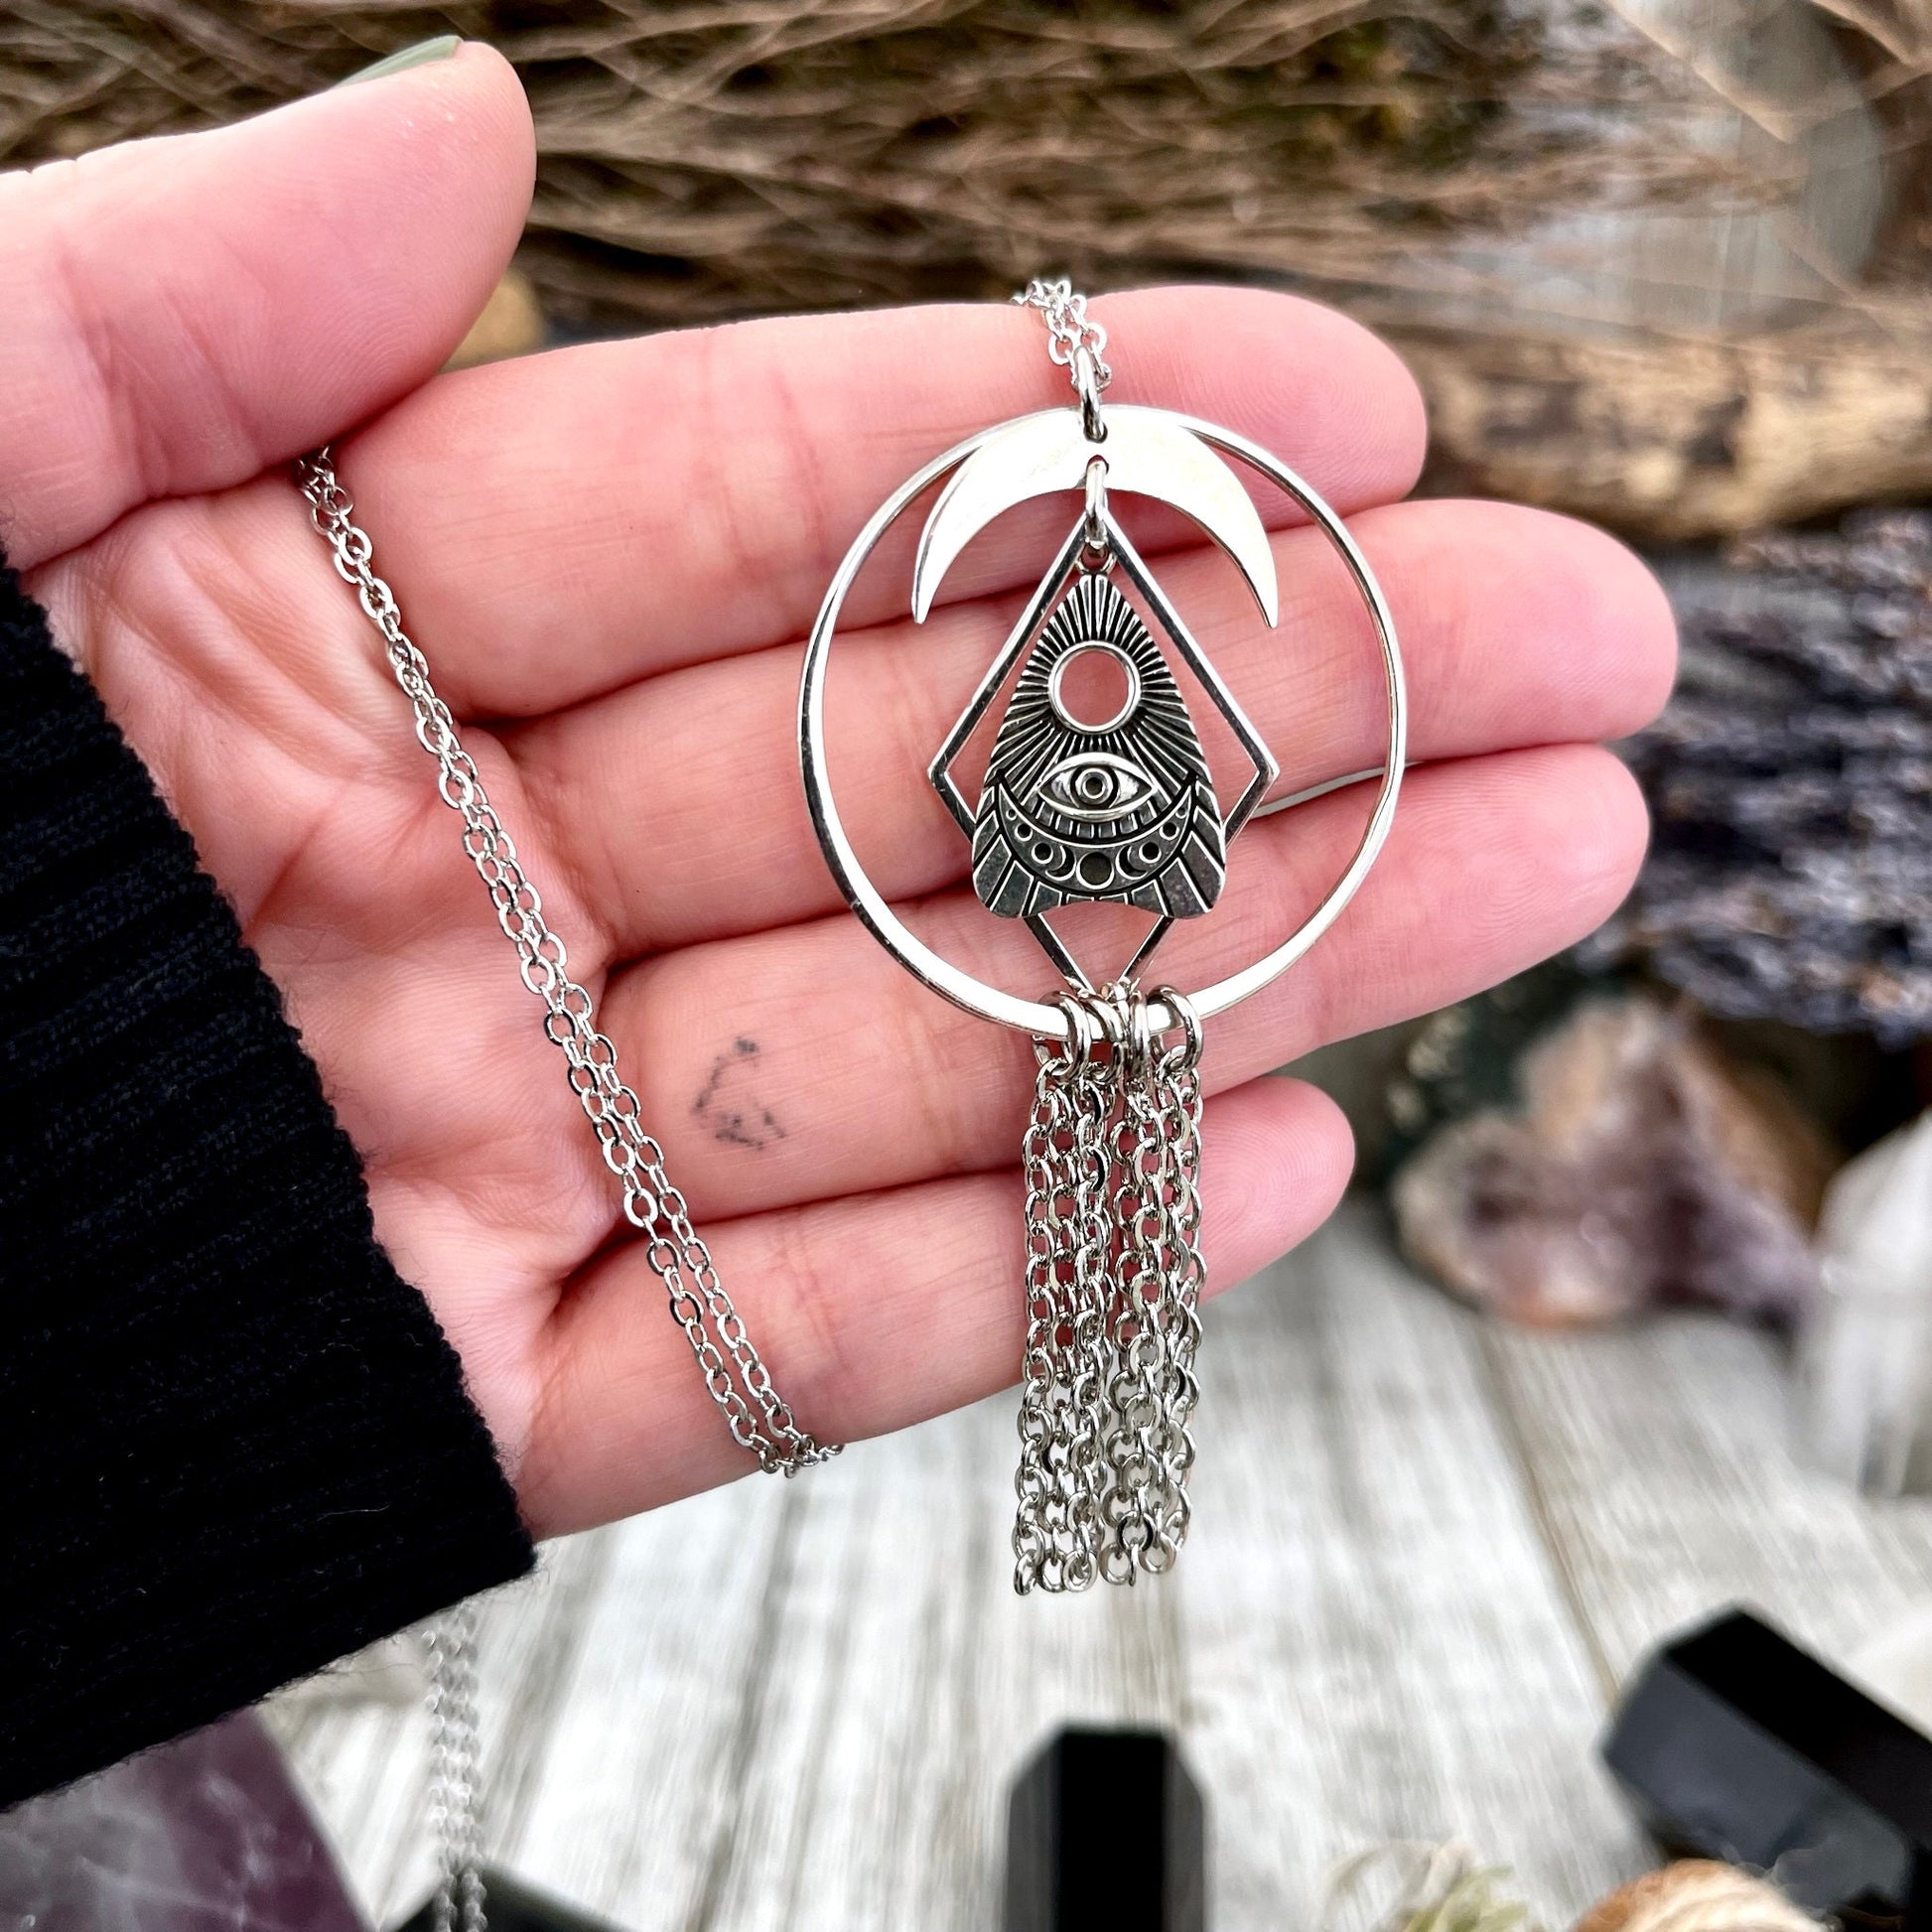 All Seeing Eye, Bohemian Jewelry, Etsy ID: 1655032121, Fringe Necklace, Gothic Jewelry, Jewelry, layering necklace, Moth Necklace, Necklaces, Pendants, planchet charm, Sterling silver, Talisman Necklace, TINY TALISMANS, Totem Amulet, Witch Jewelry, Witch